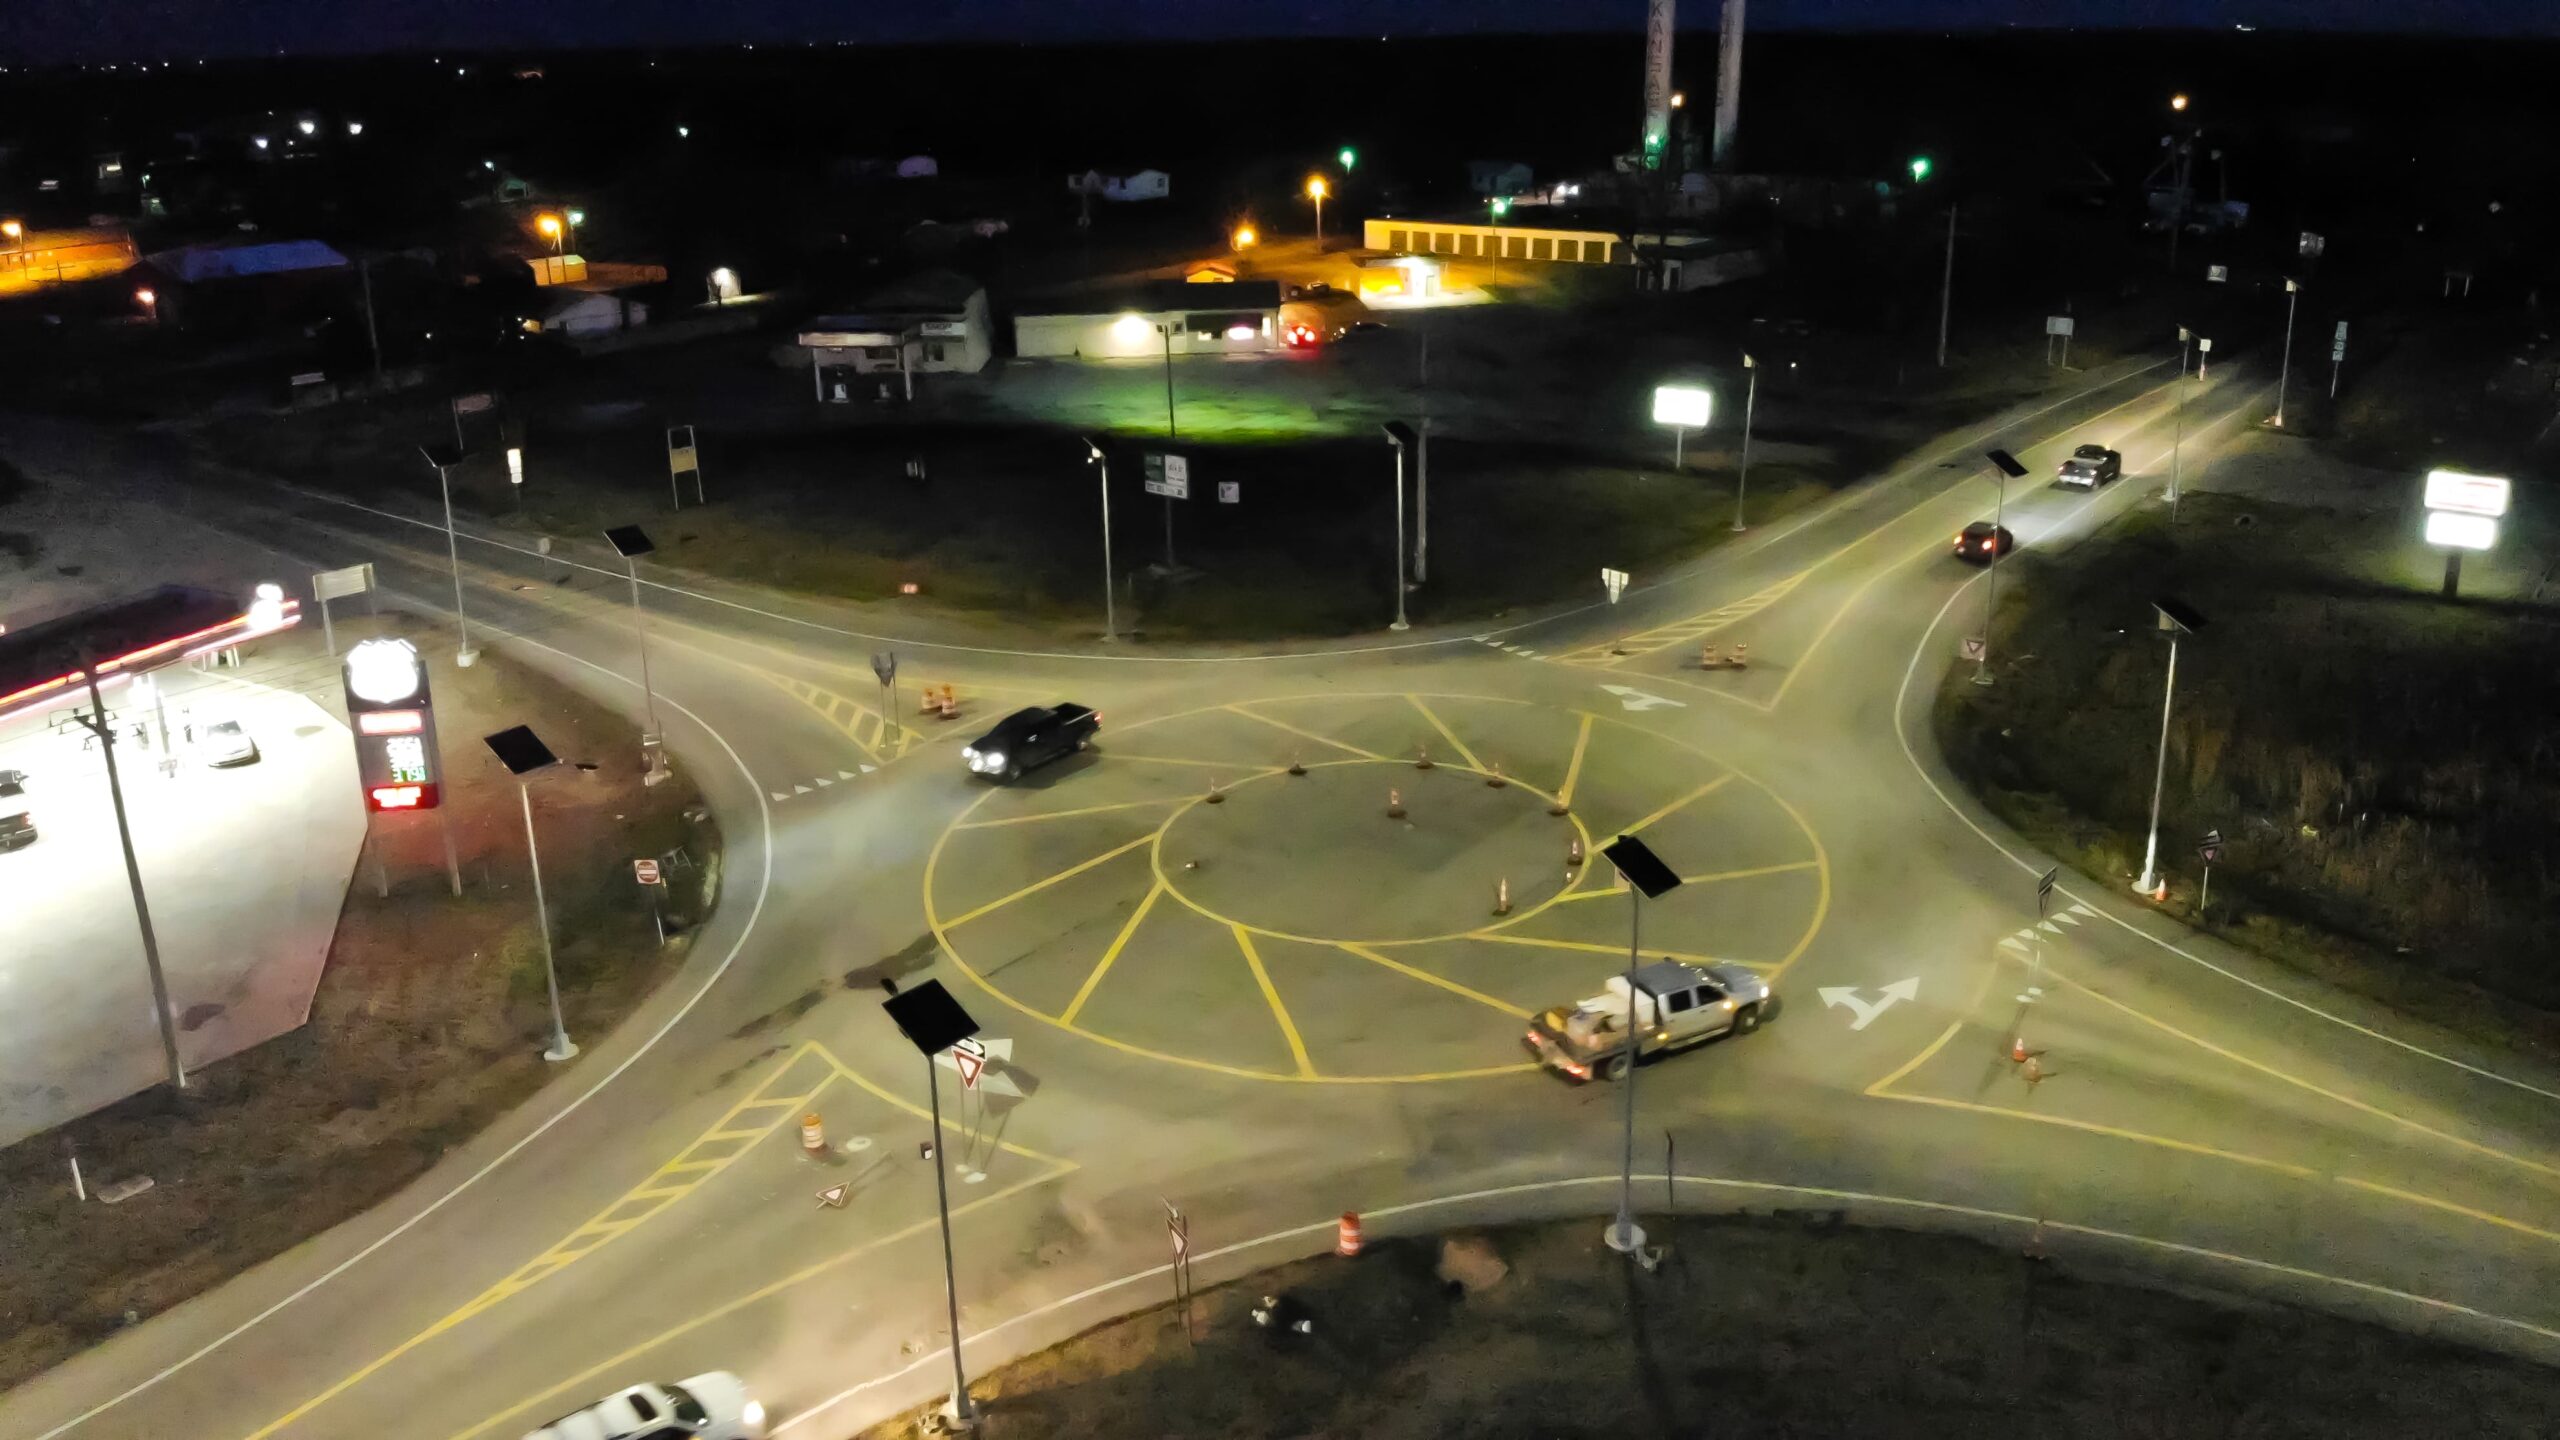 Traffic roundabout at night with vehicles and solar lighting systems